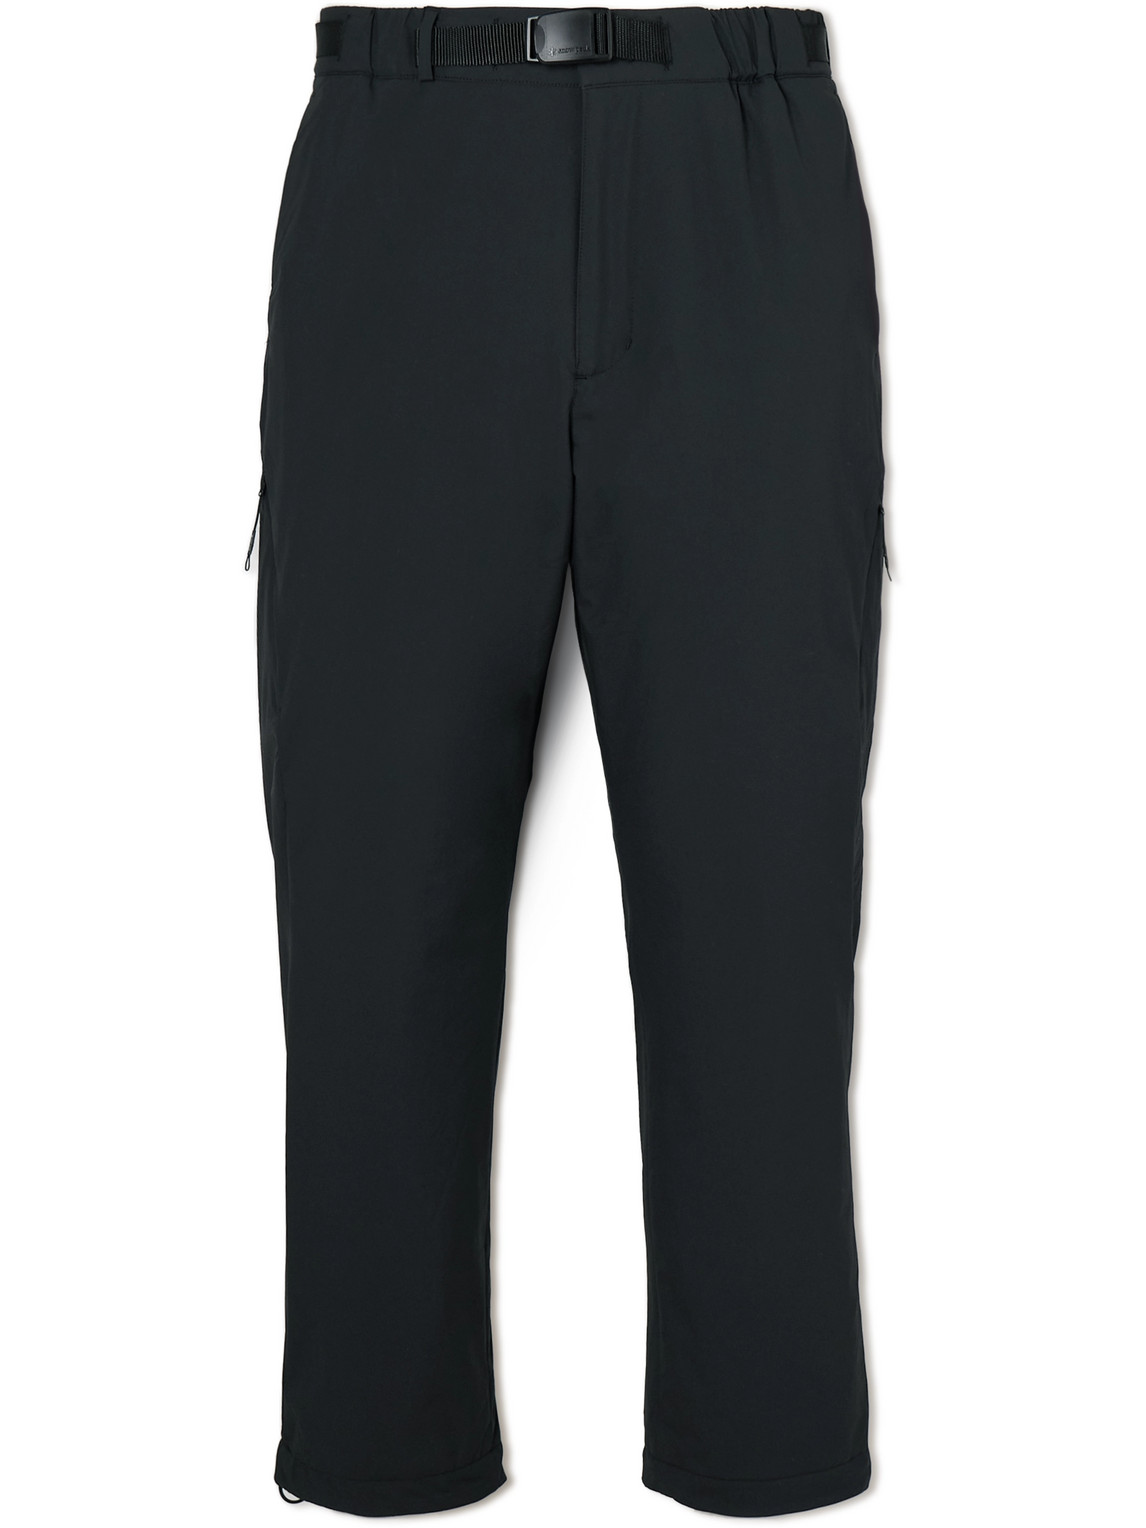 2L Octa Tapered Shell Trousers